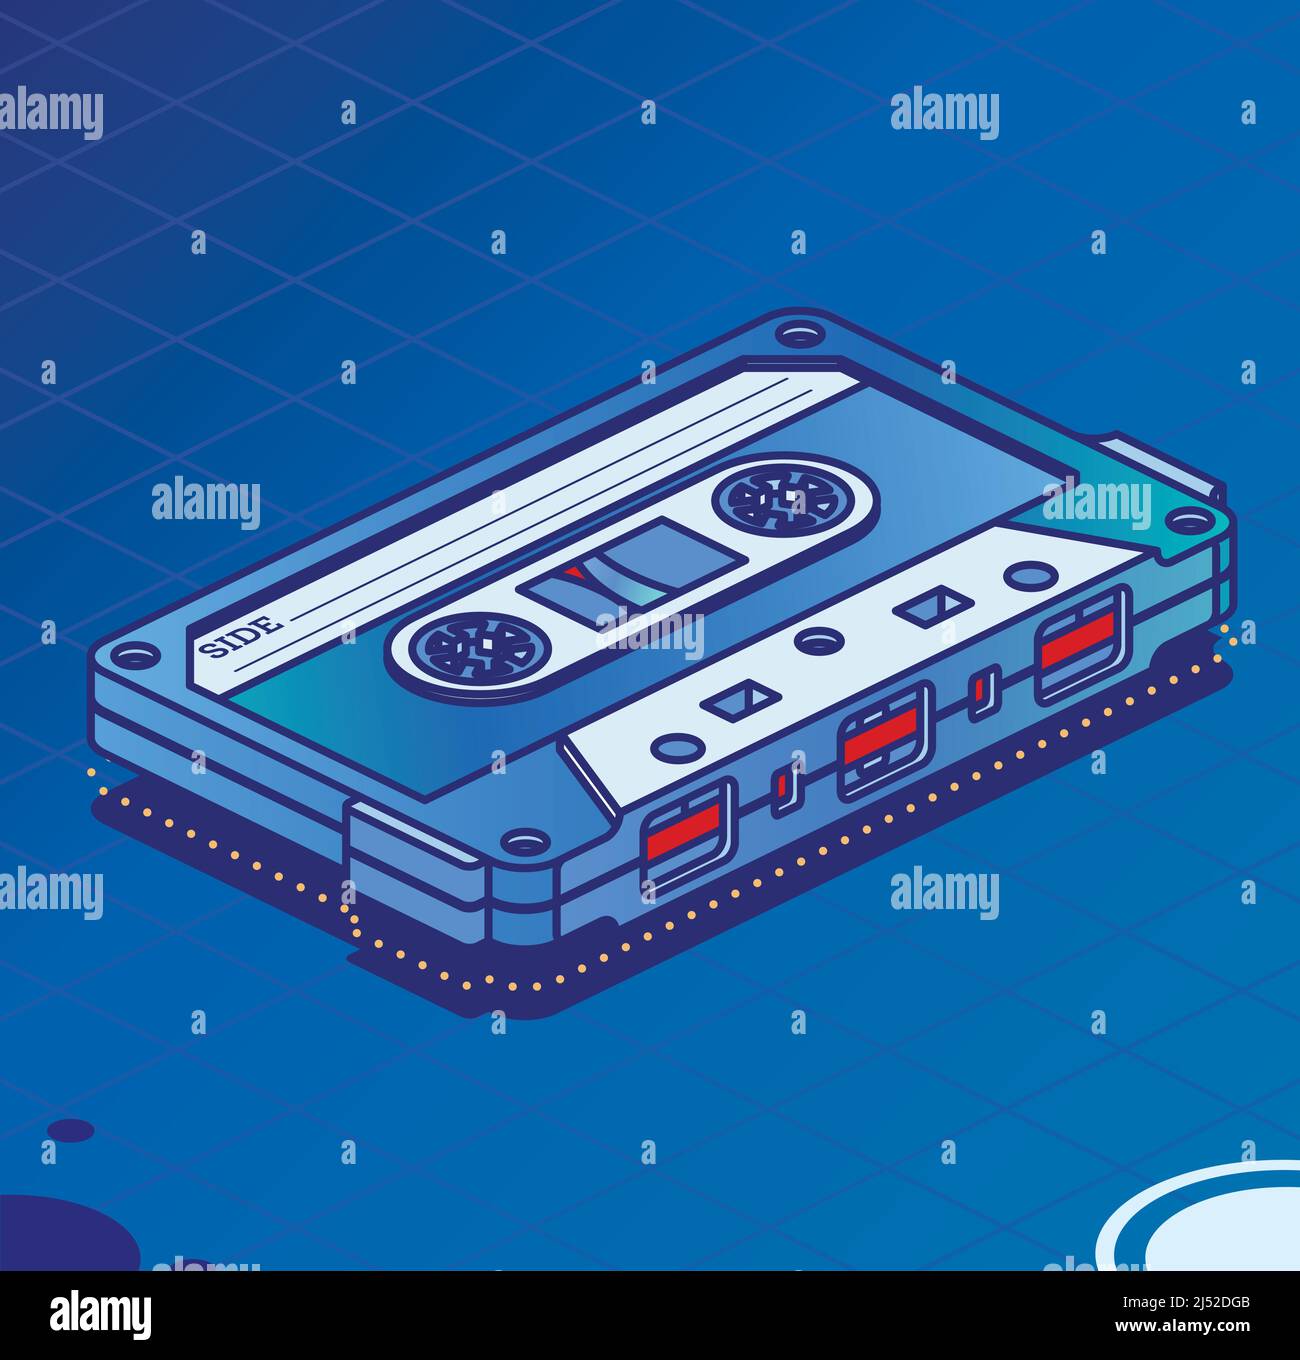 Retro Audio Cassette Tape. Isometric Outline Music Concept. Retro Device from 80s and 90s. Vector Illustration. Stock Vector